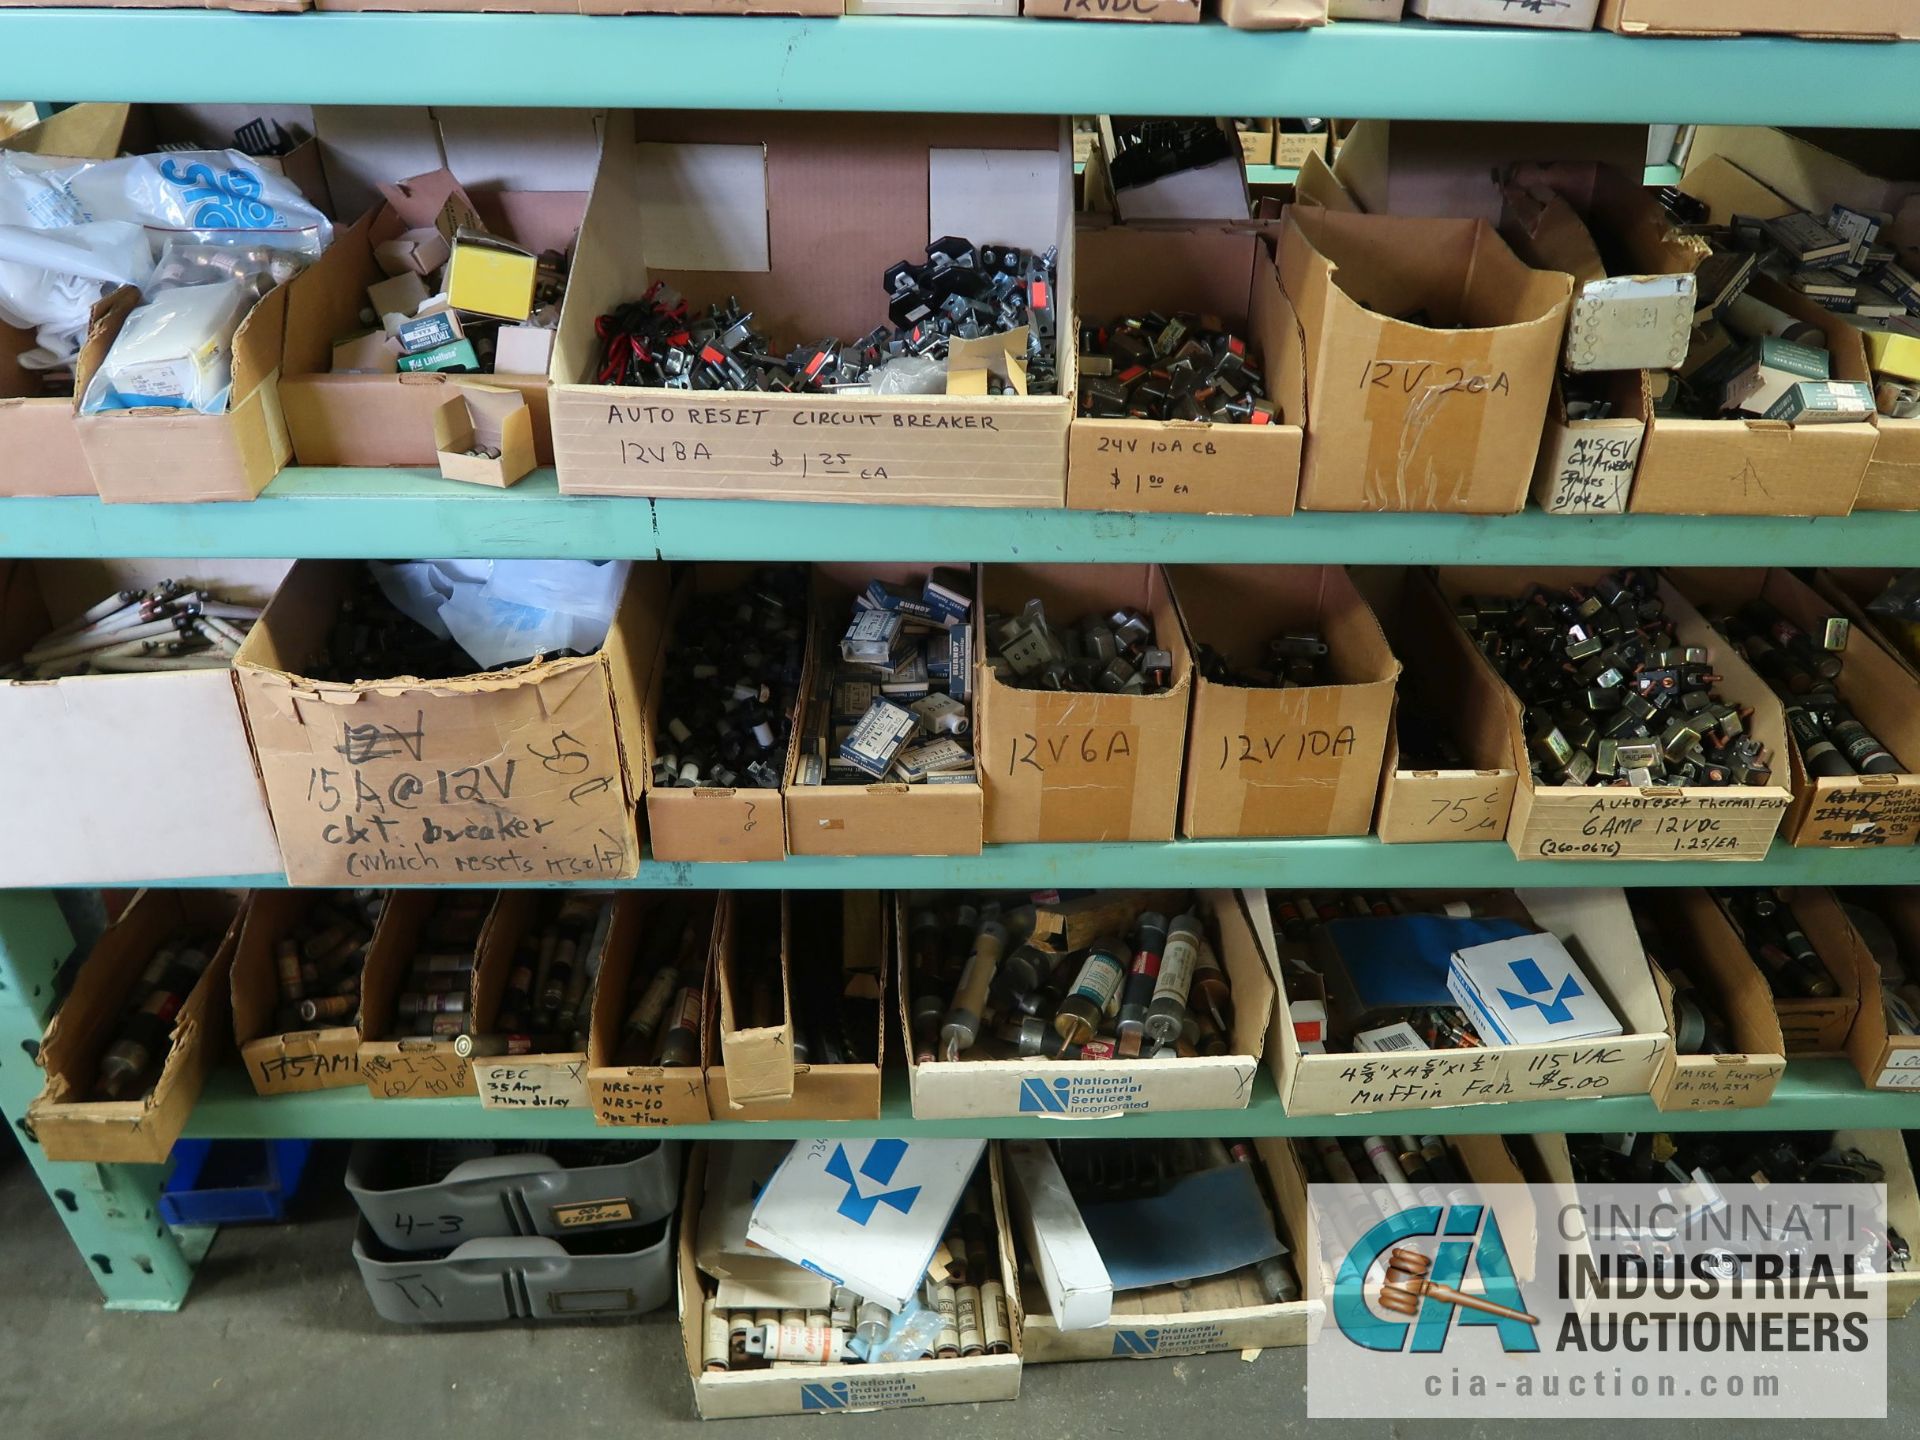 CONTENTS OF (4) RACKS INCLUDING MISCELLANEOUS FUSES, FUSE HOLDERS, HEAT SINKS **NO RACKS** - Image 4 of 24